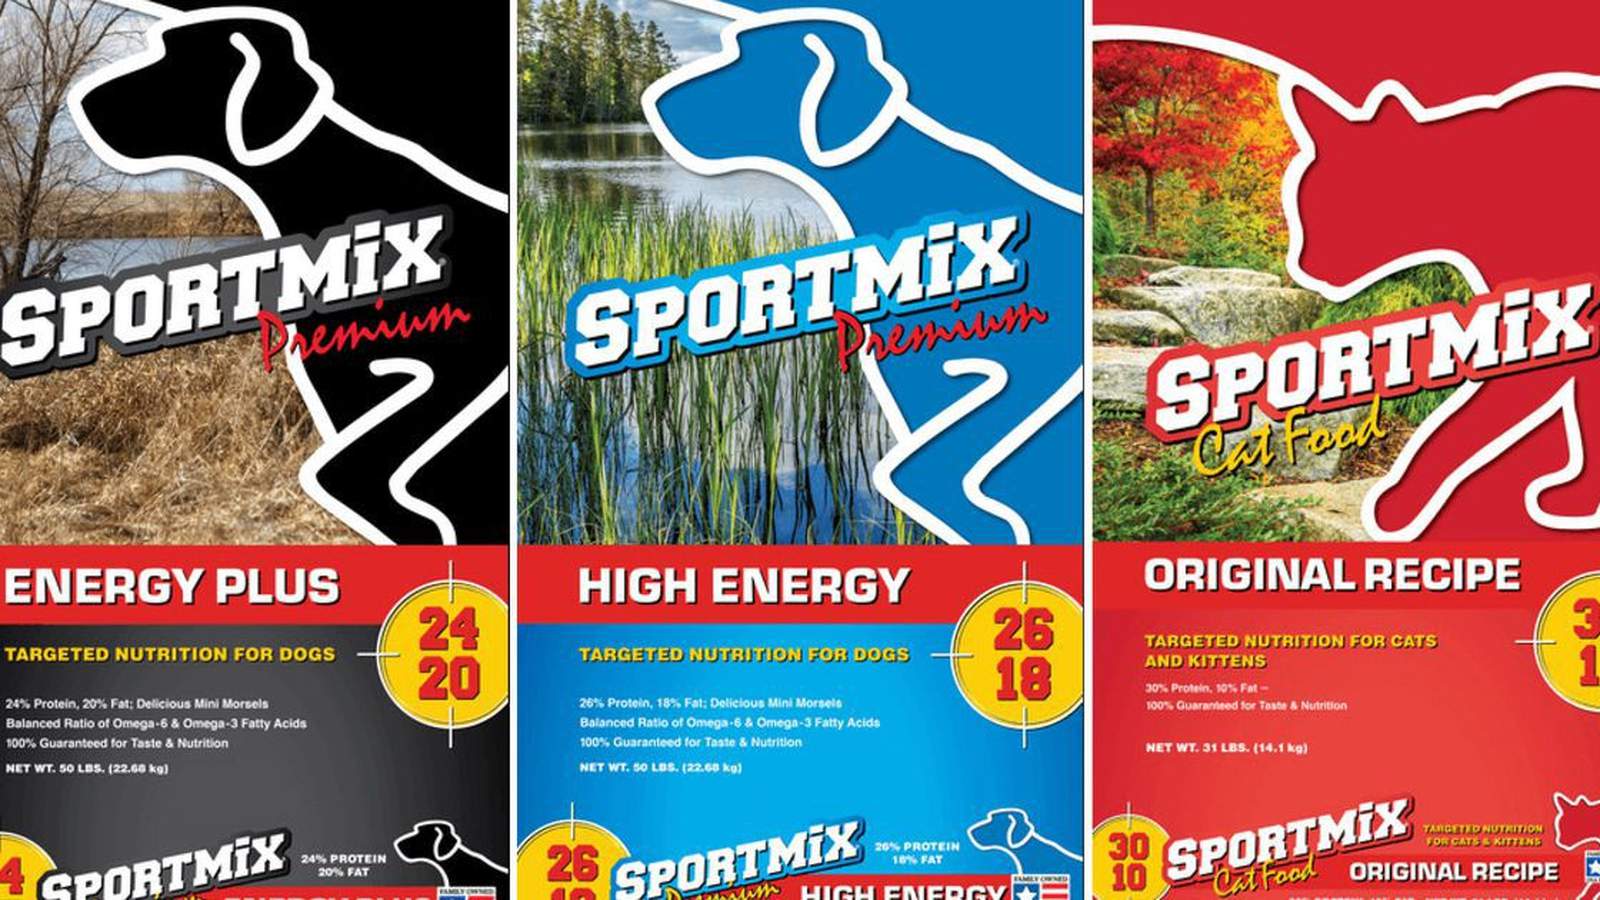 Sportmix pet food recall expanded after additional deaths